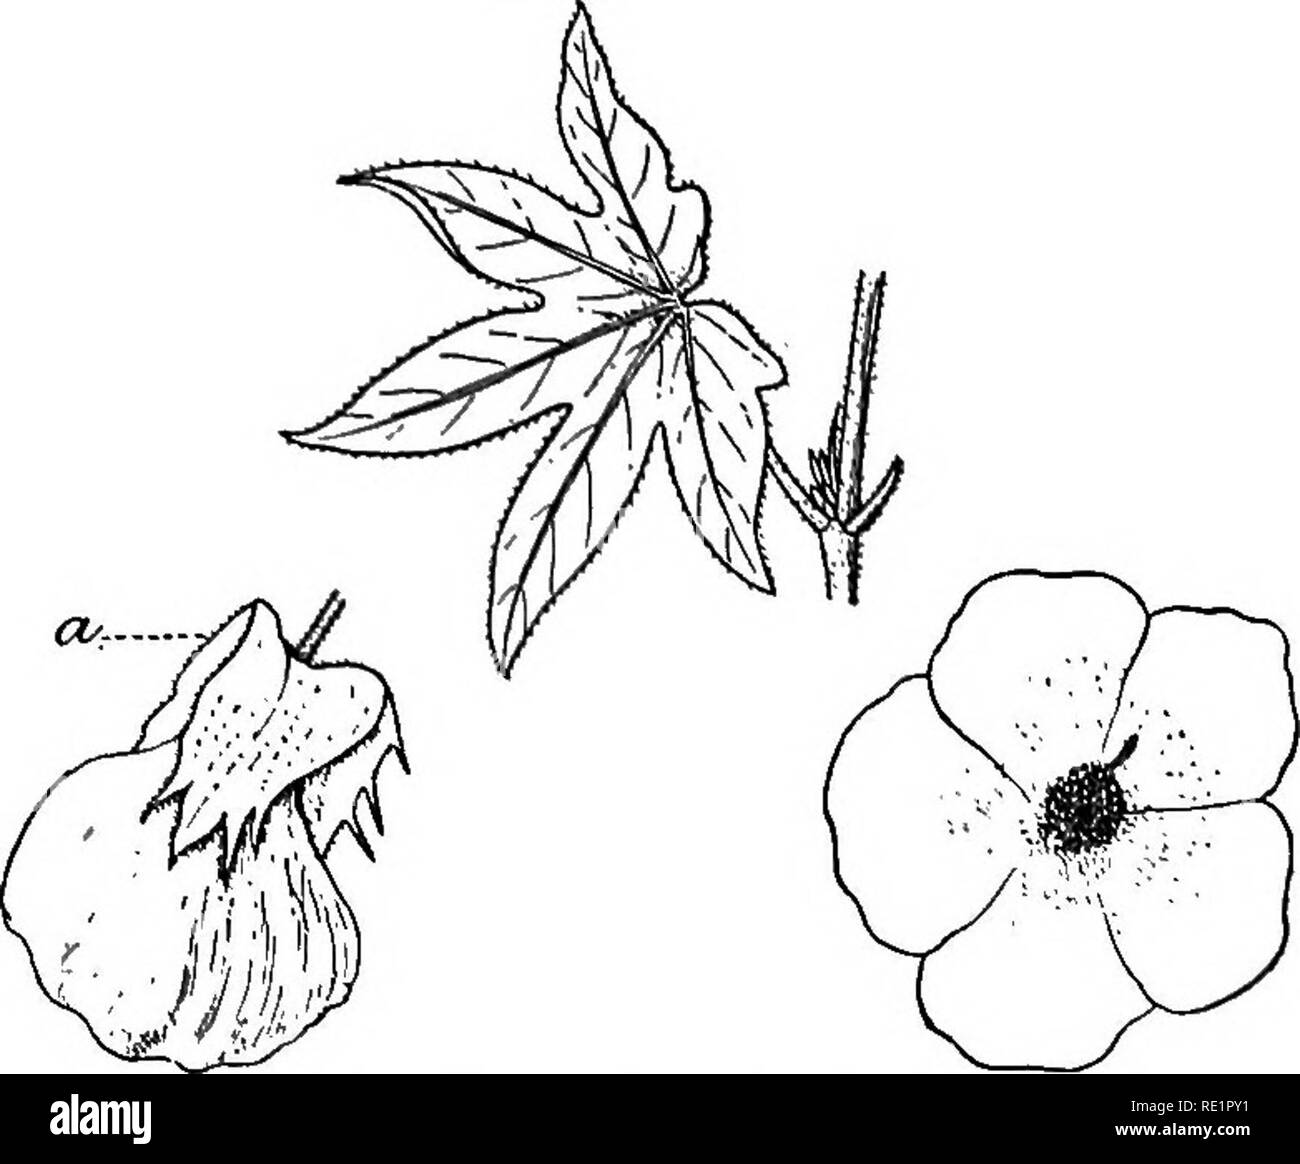 . A manual of Indian botany. Botany. THALAMIFLOR^ 193 The following are commonly-occurring plants: jaba or Chinese Rose {Hibiscus Rosa-sinensis) (fig. 166), a common garden shrub; bhendi or dhanrhas or Lady's Finger or Ram's Horn {H. esciUentus), a common cultivated vegetable; hs.n-'ka.pa.s {H.vitifolius); Madras Hemp or Madras pat {H. cannabinus), which yields a valuable fibre; sthal-padma (//. mutabilis), the petals. Fig:. 167.—Kapas {Gossyjiiutn hei-baceiim) a, Epicalyx, of which change from white to red in the course of a day; H. radiattis, a prickly shrub found in cultiva- tion; ban-okra  Stock Photo